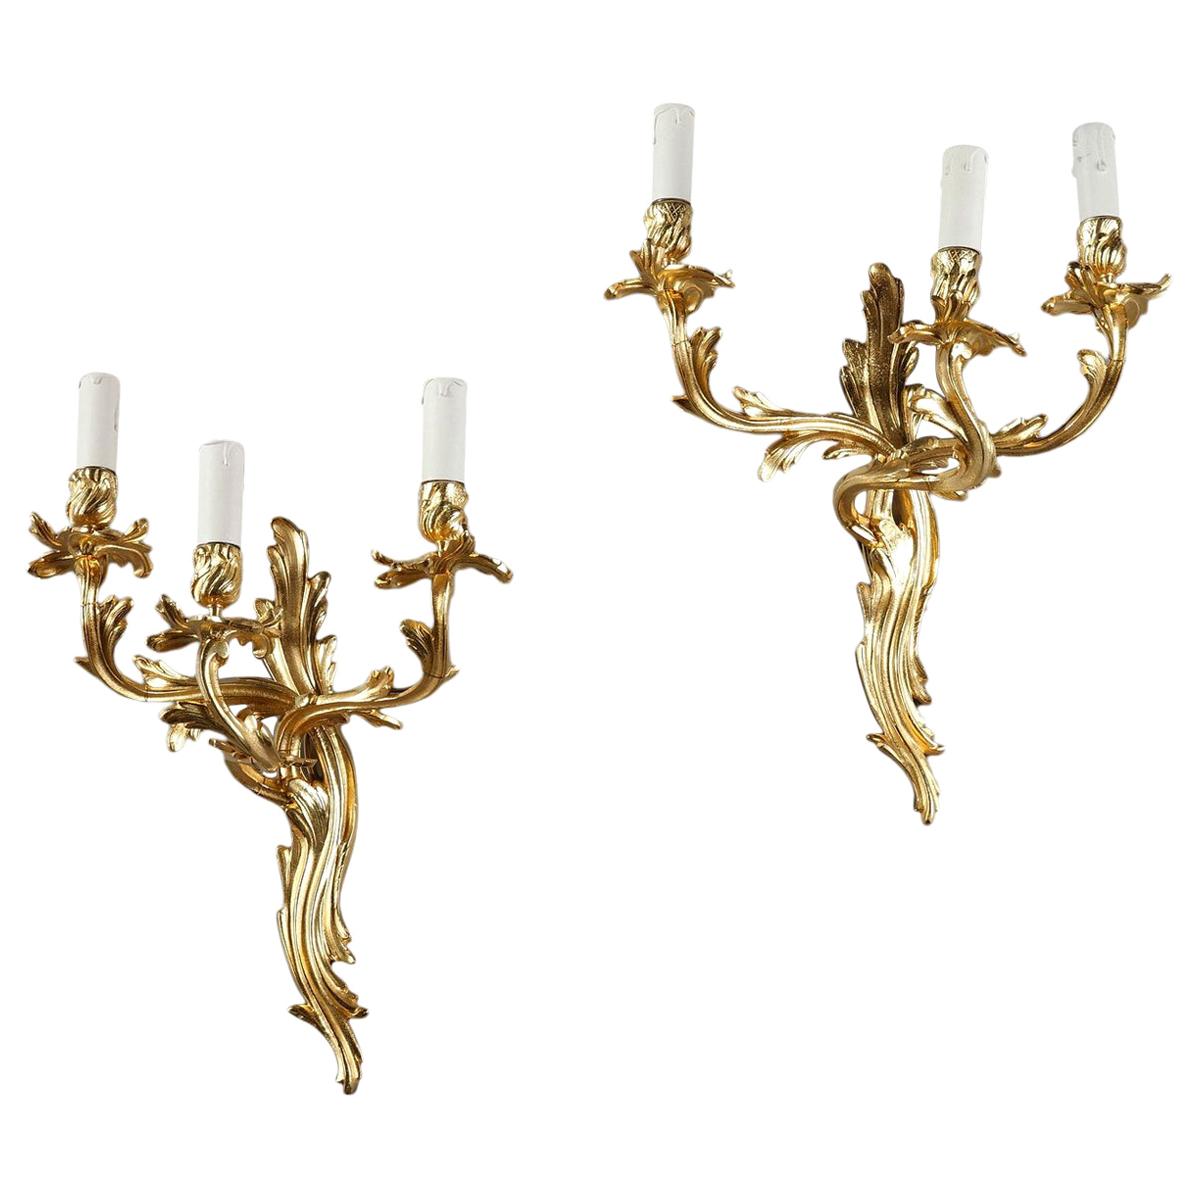 Late 19th Century Pair of French Wall Sconces in Louis XV Style